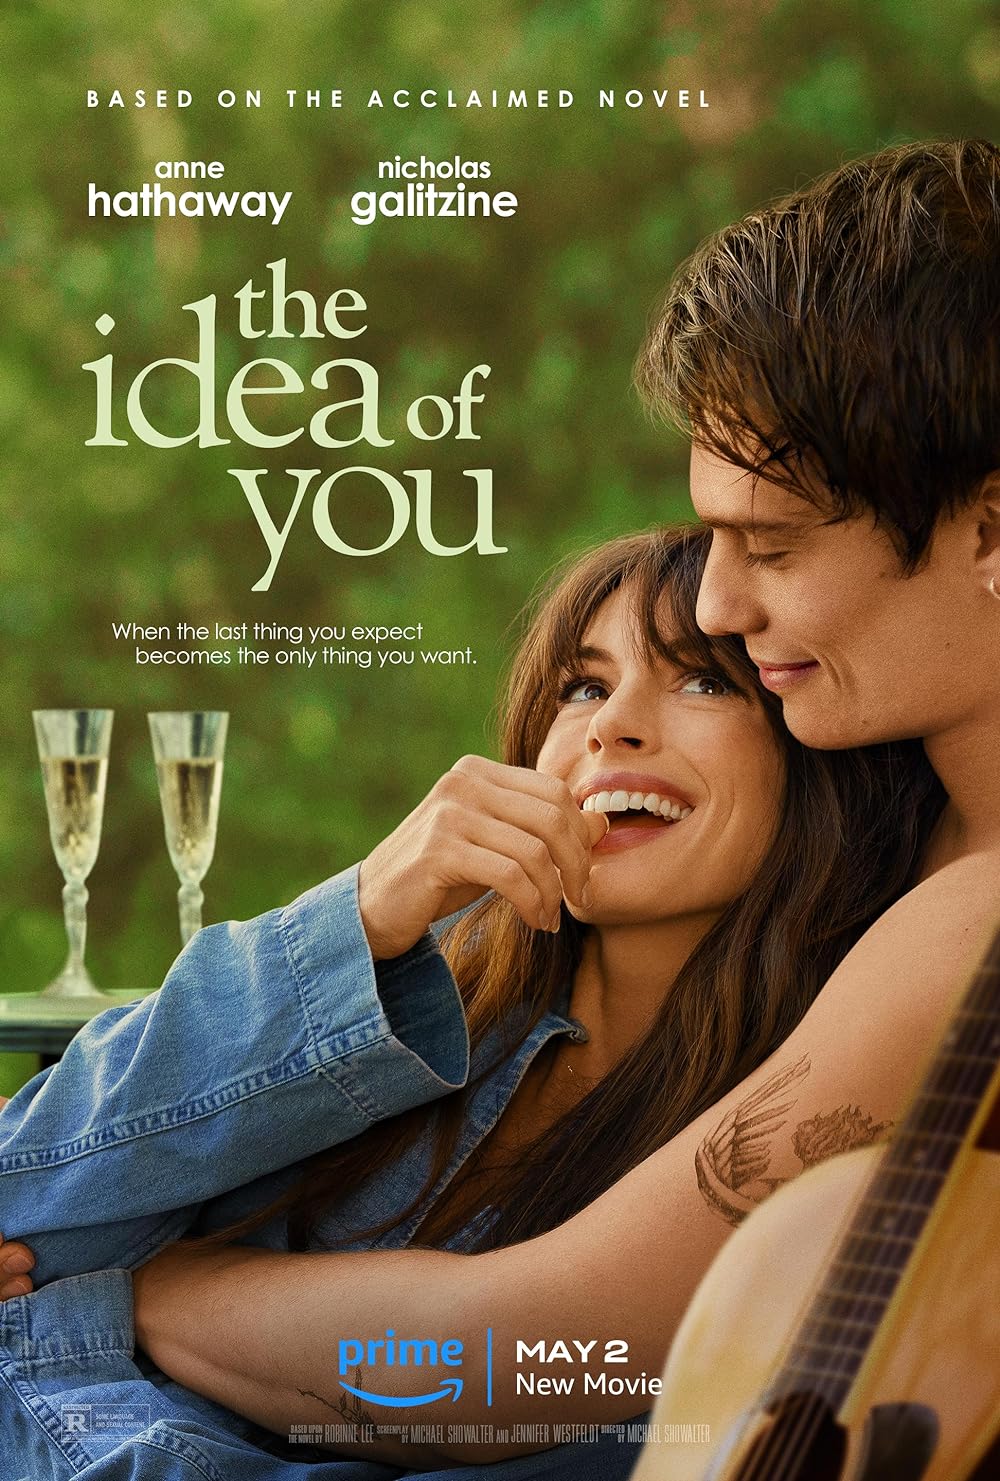 The Idea of You (Streaming on Prime Video) - May 2Anne Hathaway and Nicholas Galitzine headline 